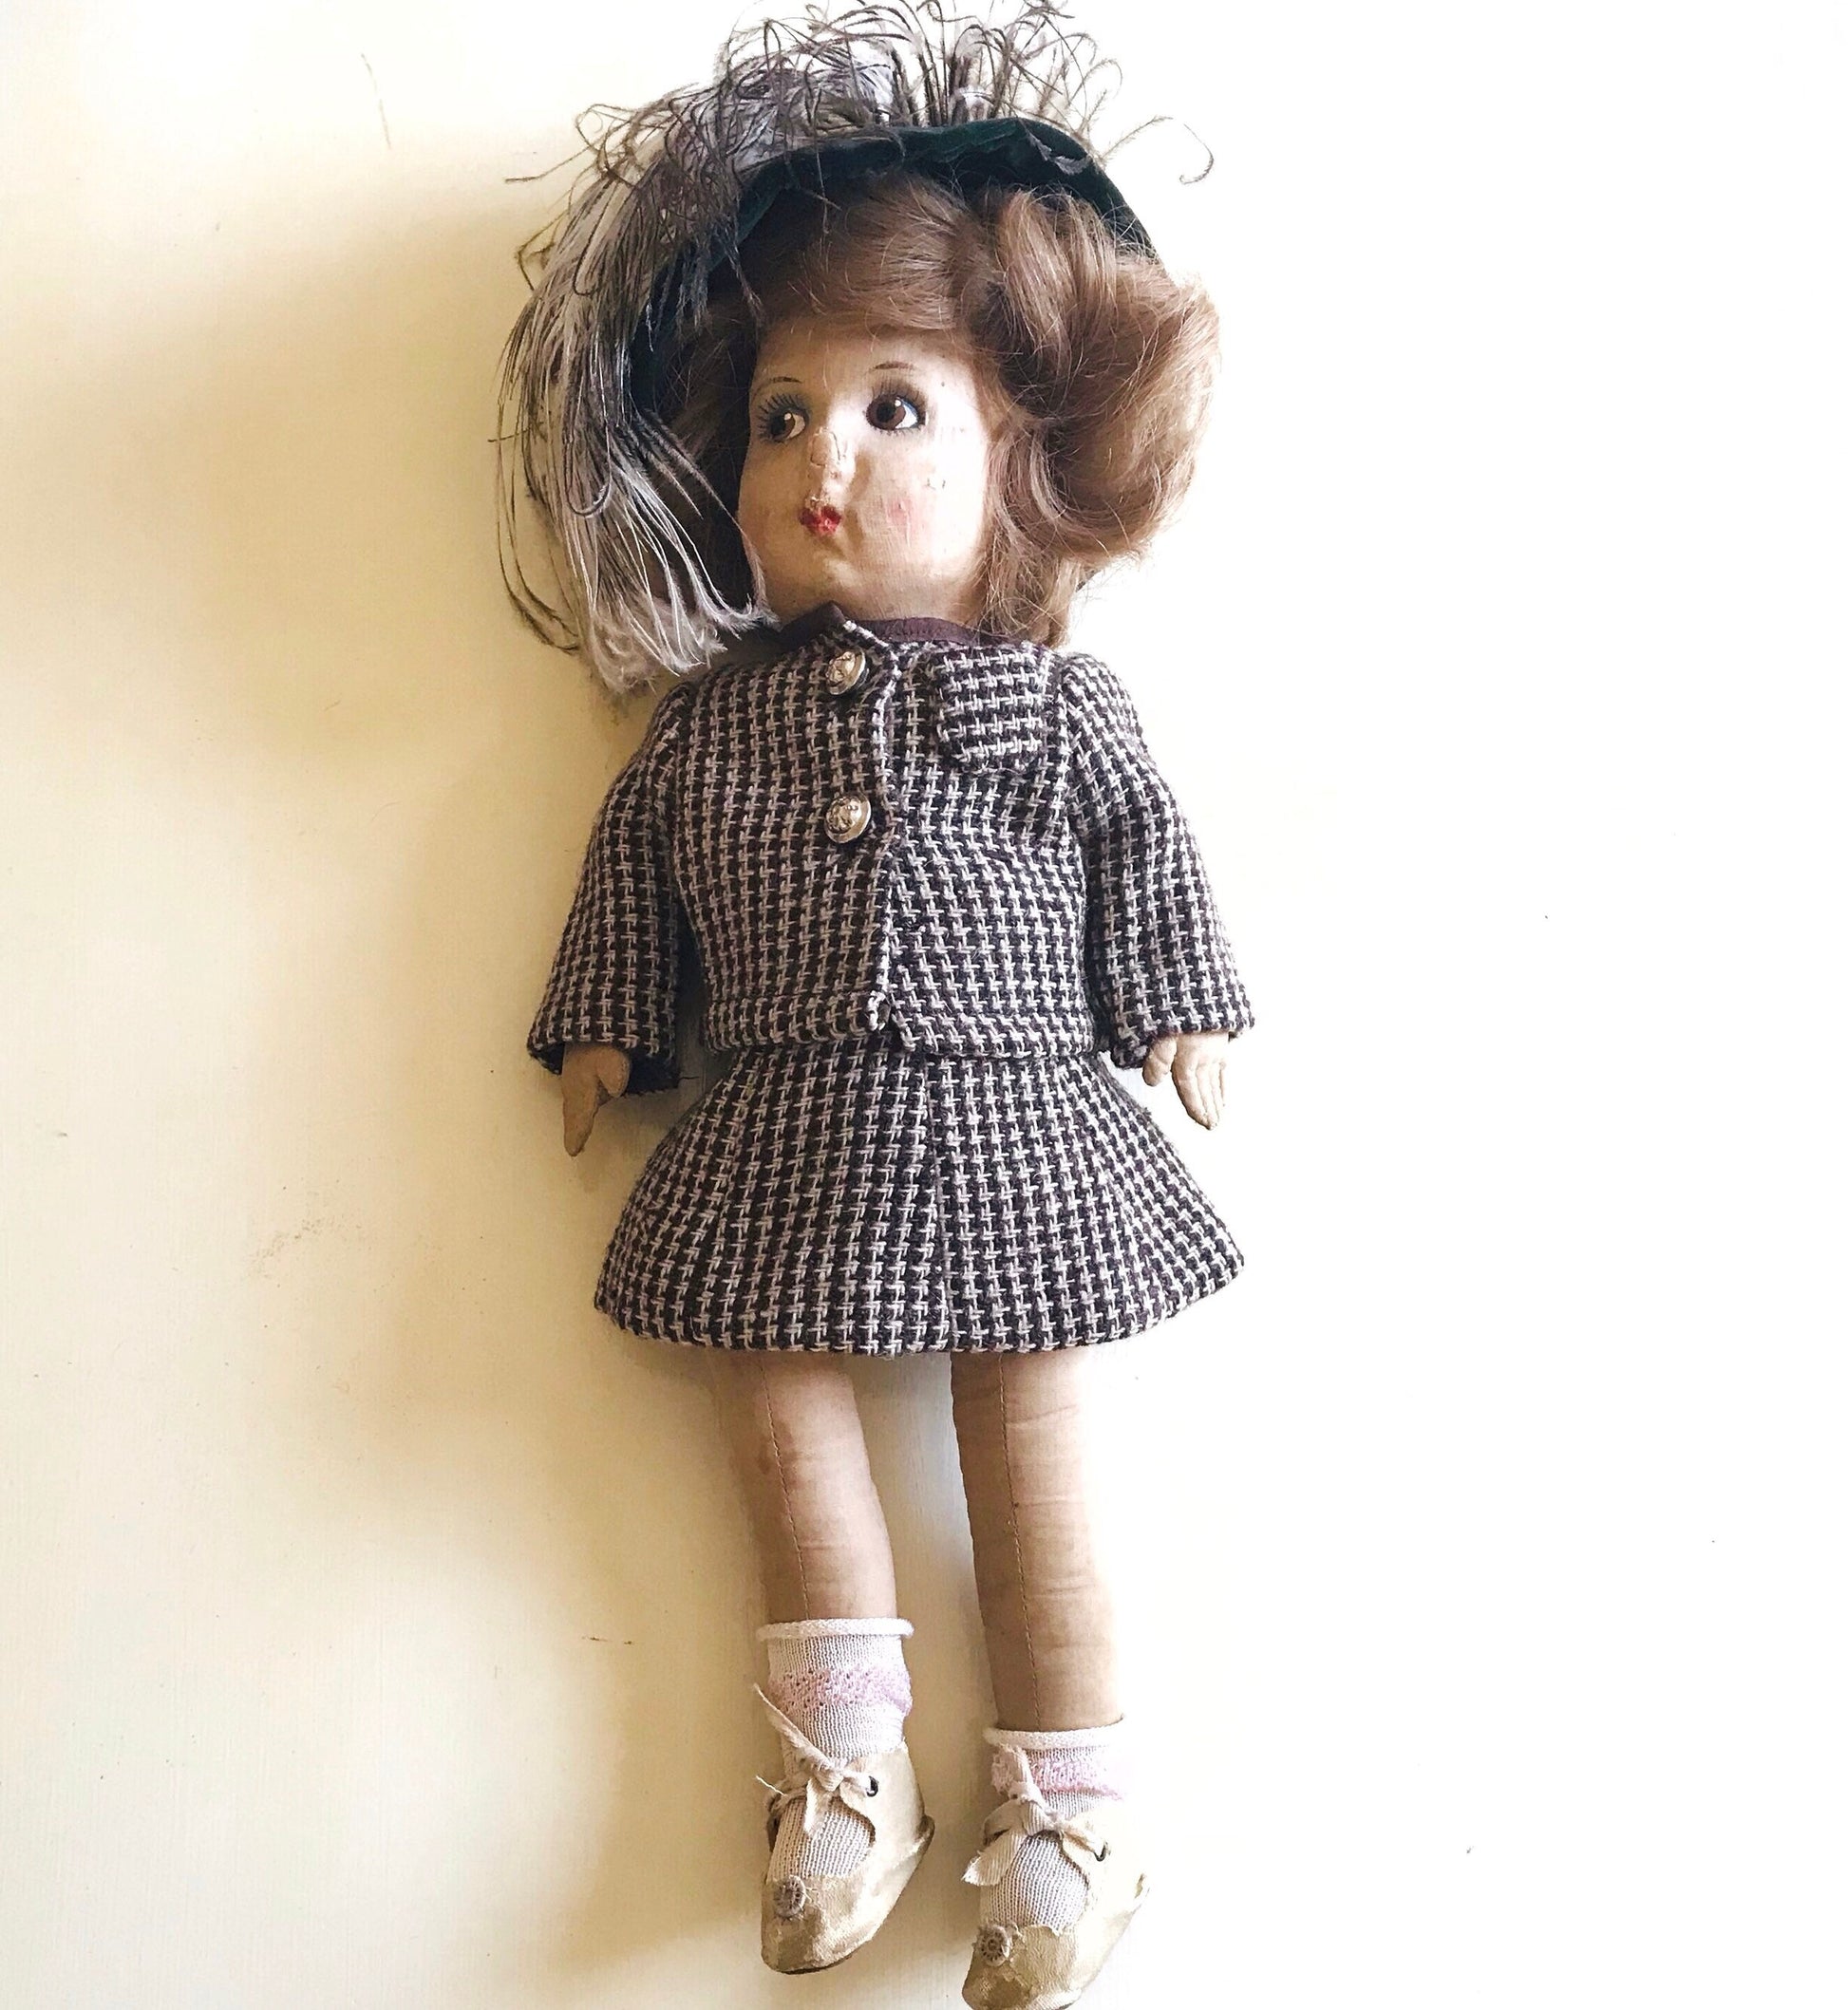 Antique Doll, Gre Poir, Pressed Cloth Doll, French Doll, 1920s, Rare Doll, Jointed Doll, 17 inch Doll, Lenci Type, Blond, Brown Eyes - A. Mandaline Art